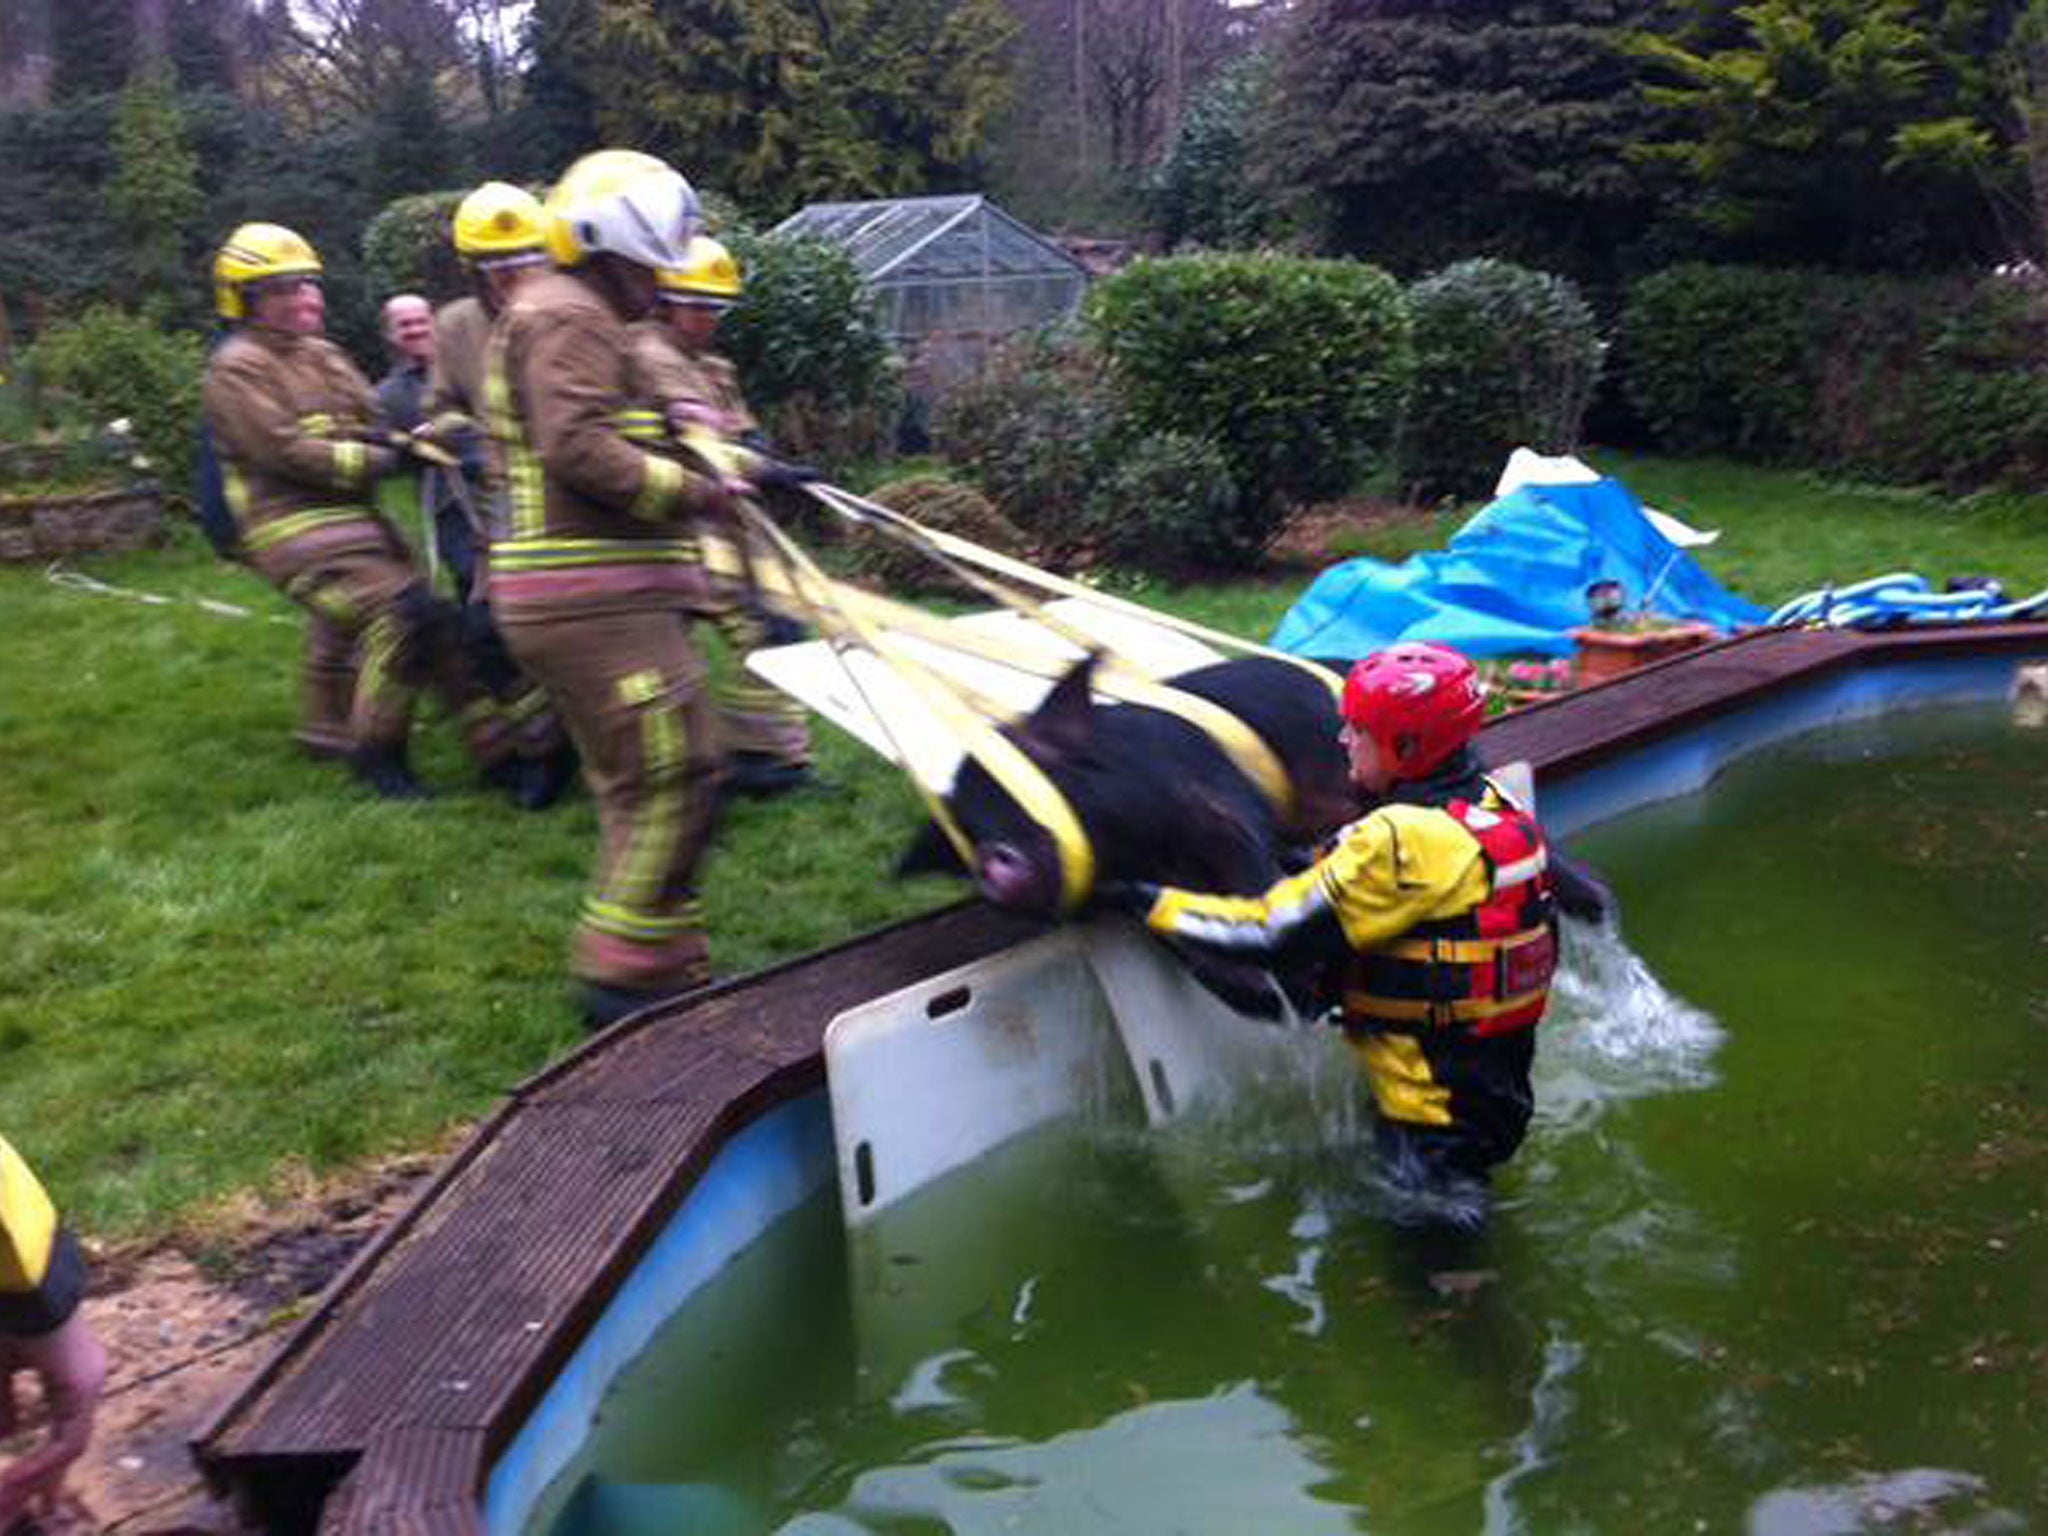 Firefighters haul Pigwig out of the swimming pool in Hampshire.